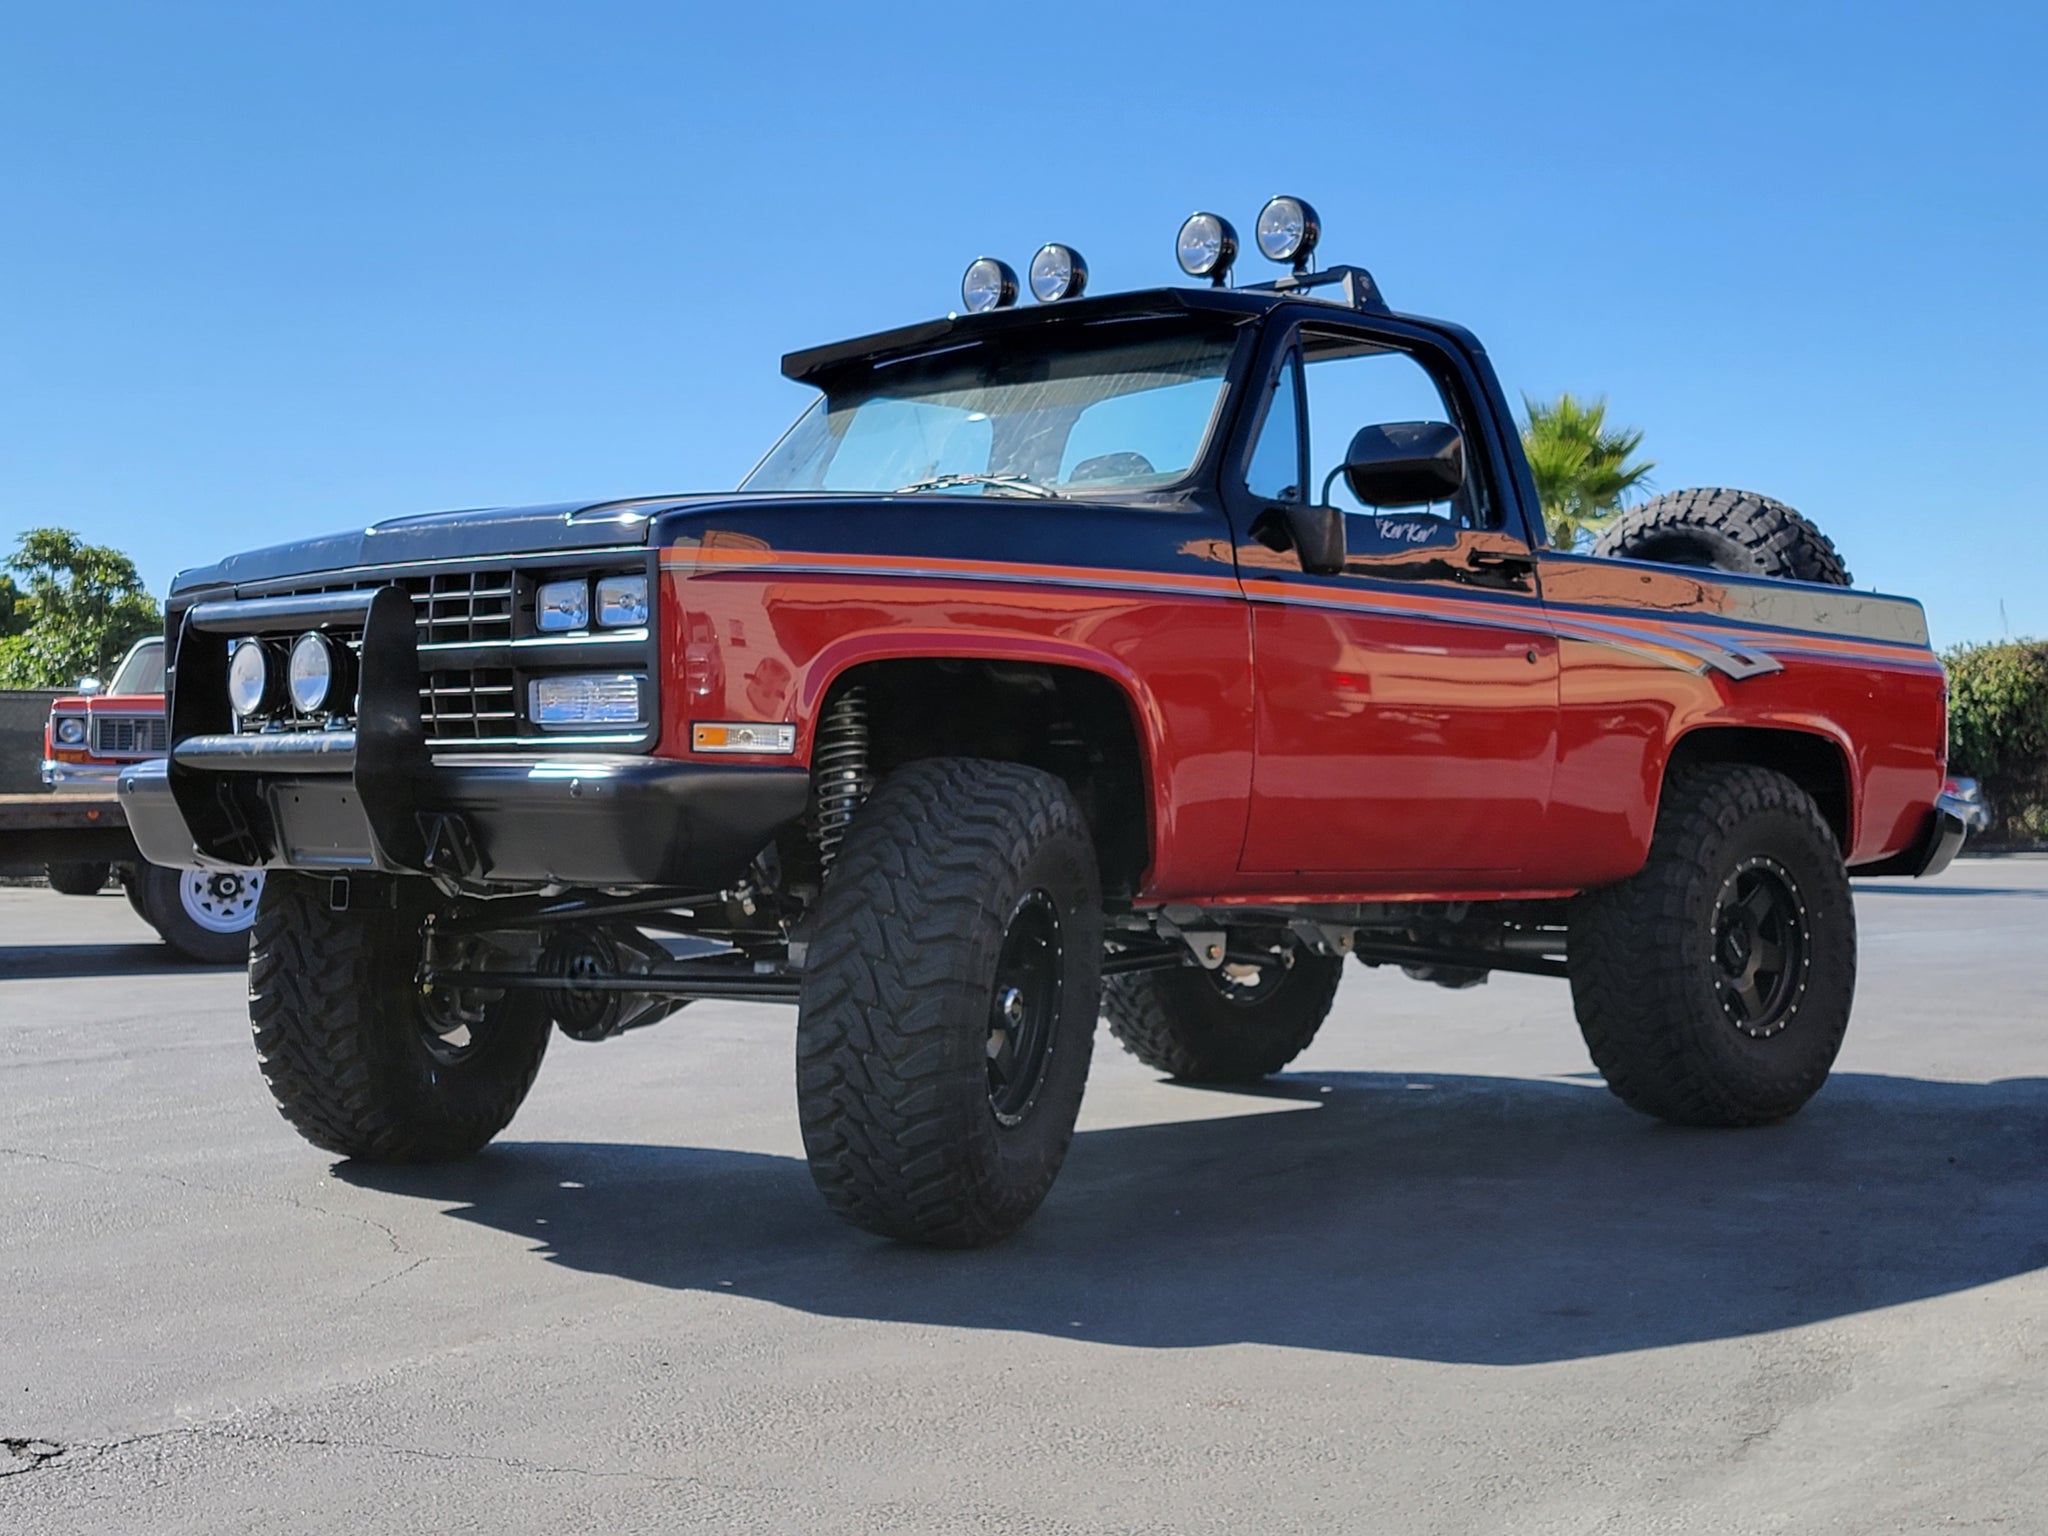 Fortify Off-Road Coilover Kit for Chevy K5 blazer, K10, K20 and K30 –  Roberts Custom Trucks